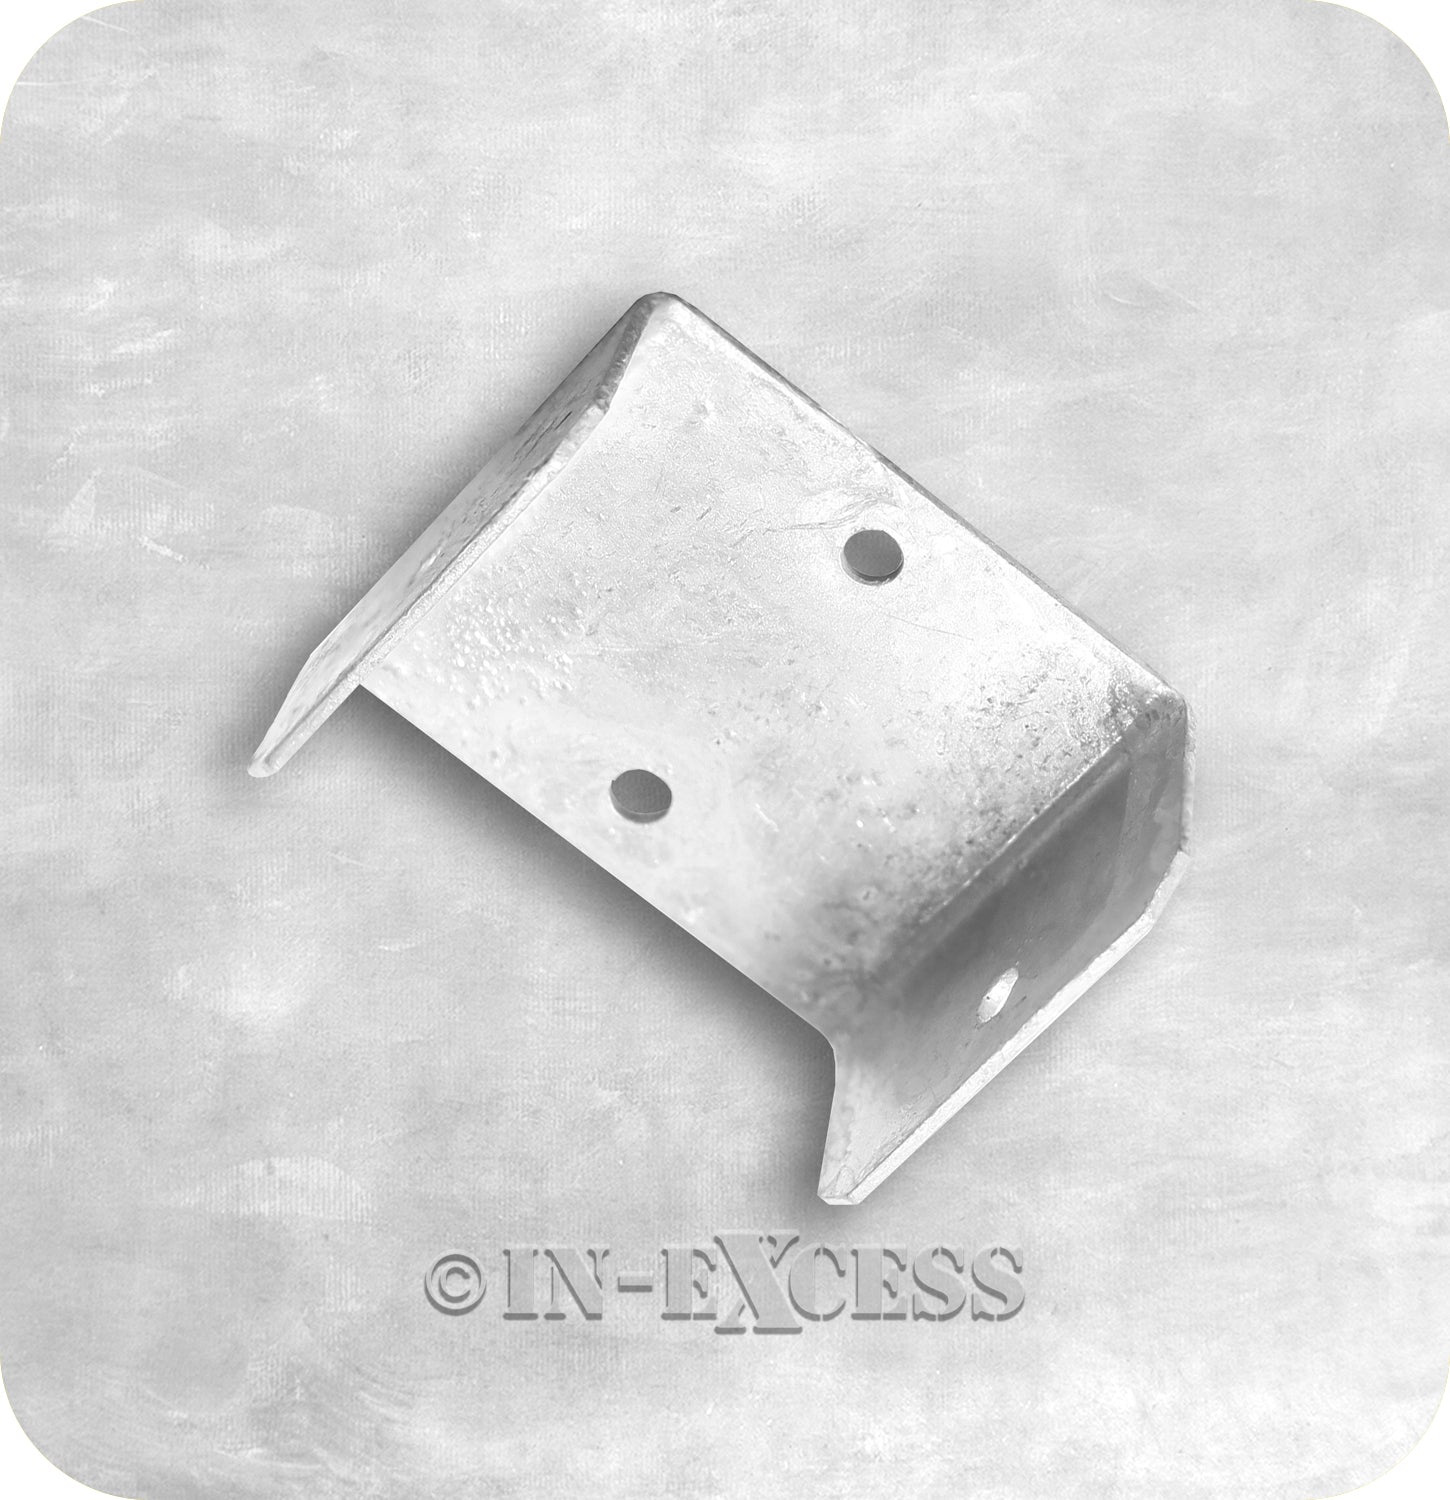 In-Excess Hardware Galvanised Fence Panel Fixing Fencing U-Clips - 50mm